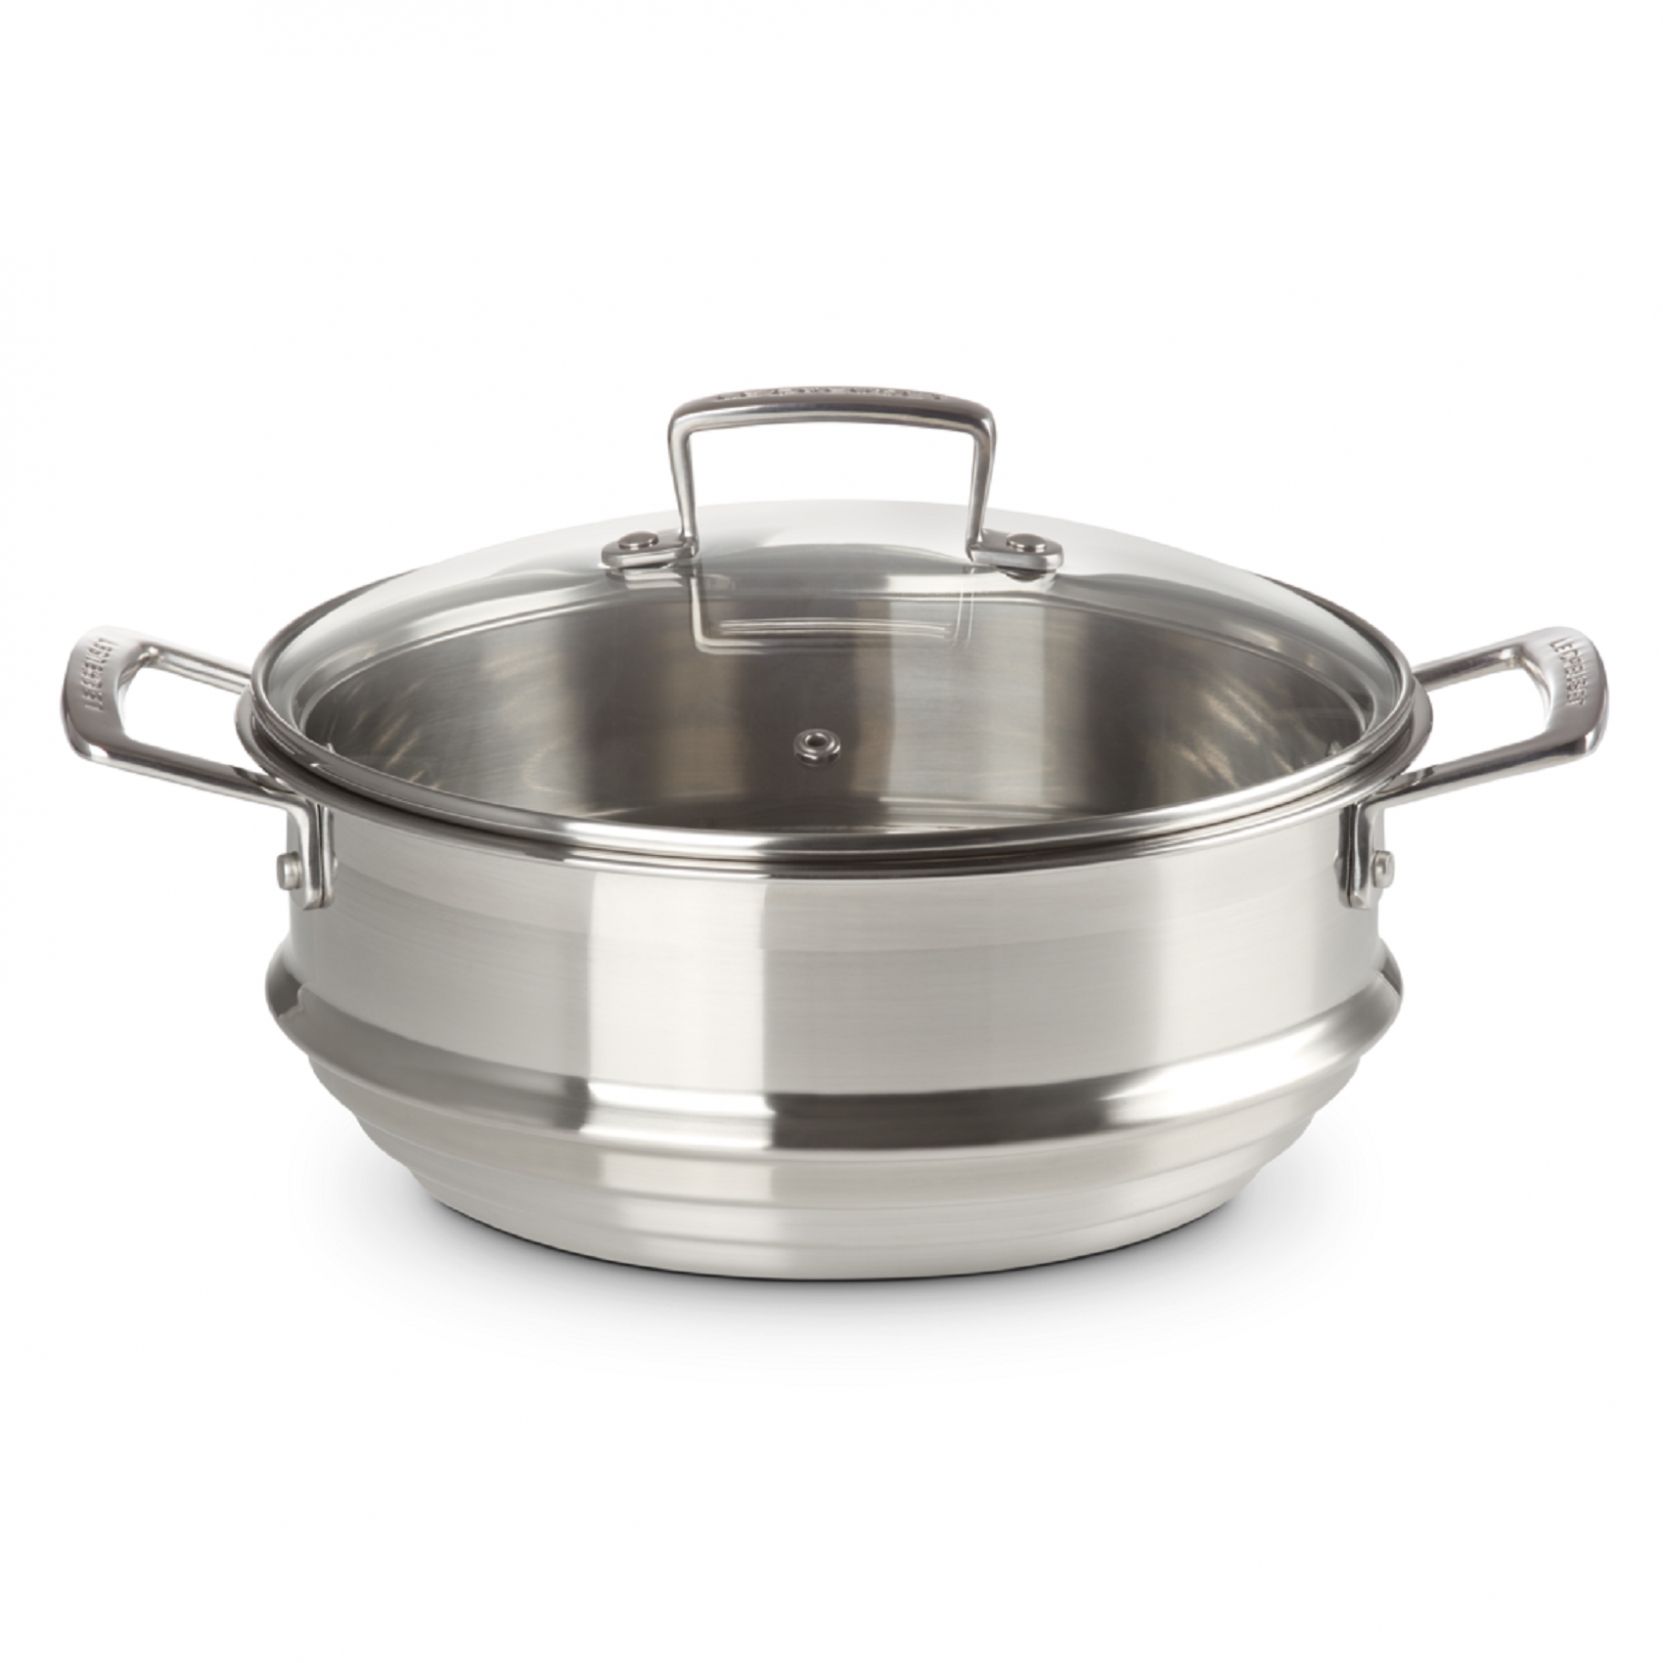 https://www.tattahome.com/82079-thickbox_default/le-creuset-stainless-steel-steamer-insert-with-lid.jpg